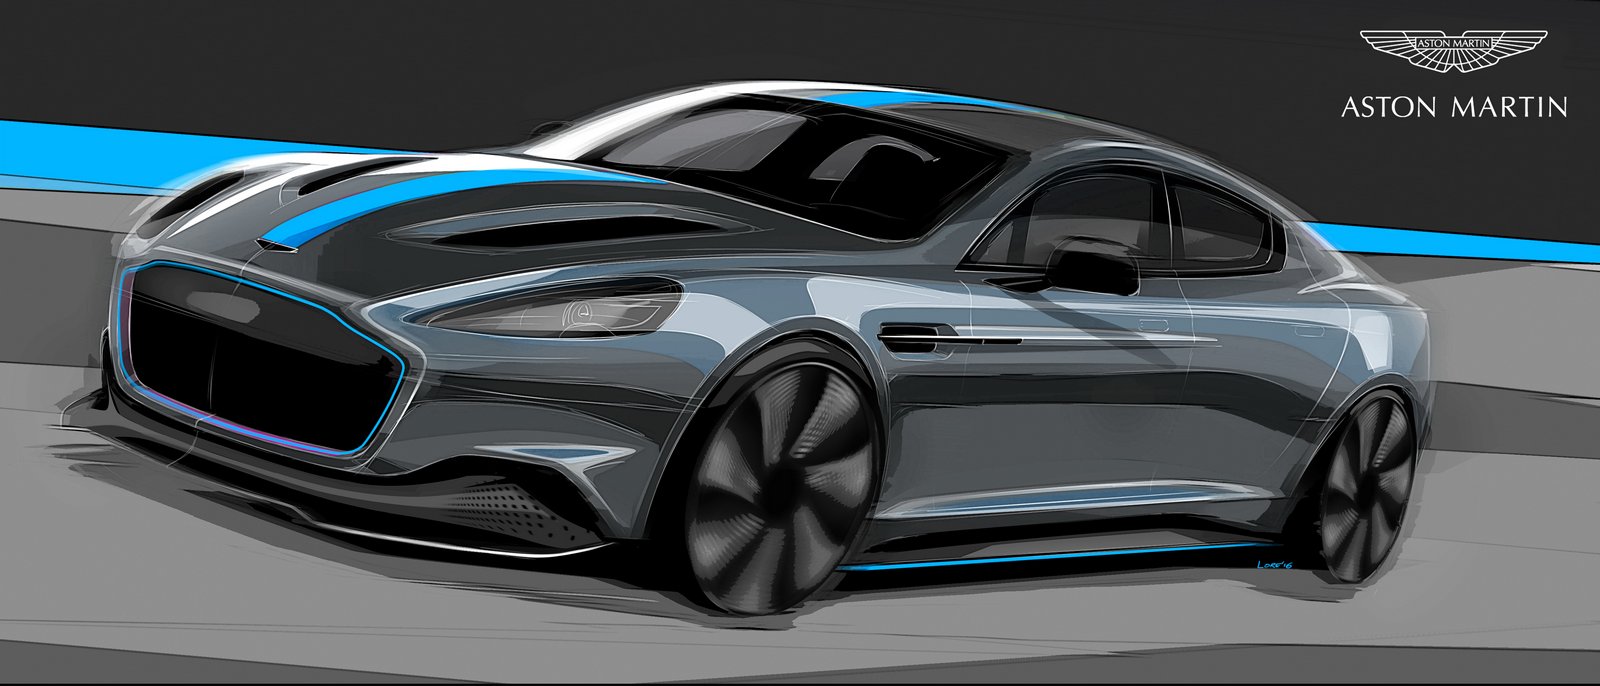 Aston Martin previews electric RapidE with sketches